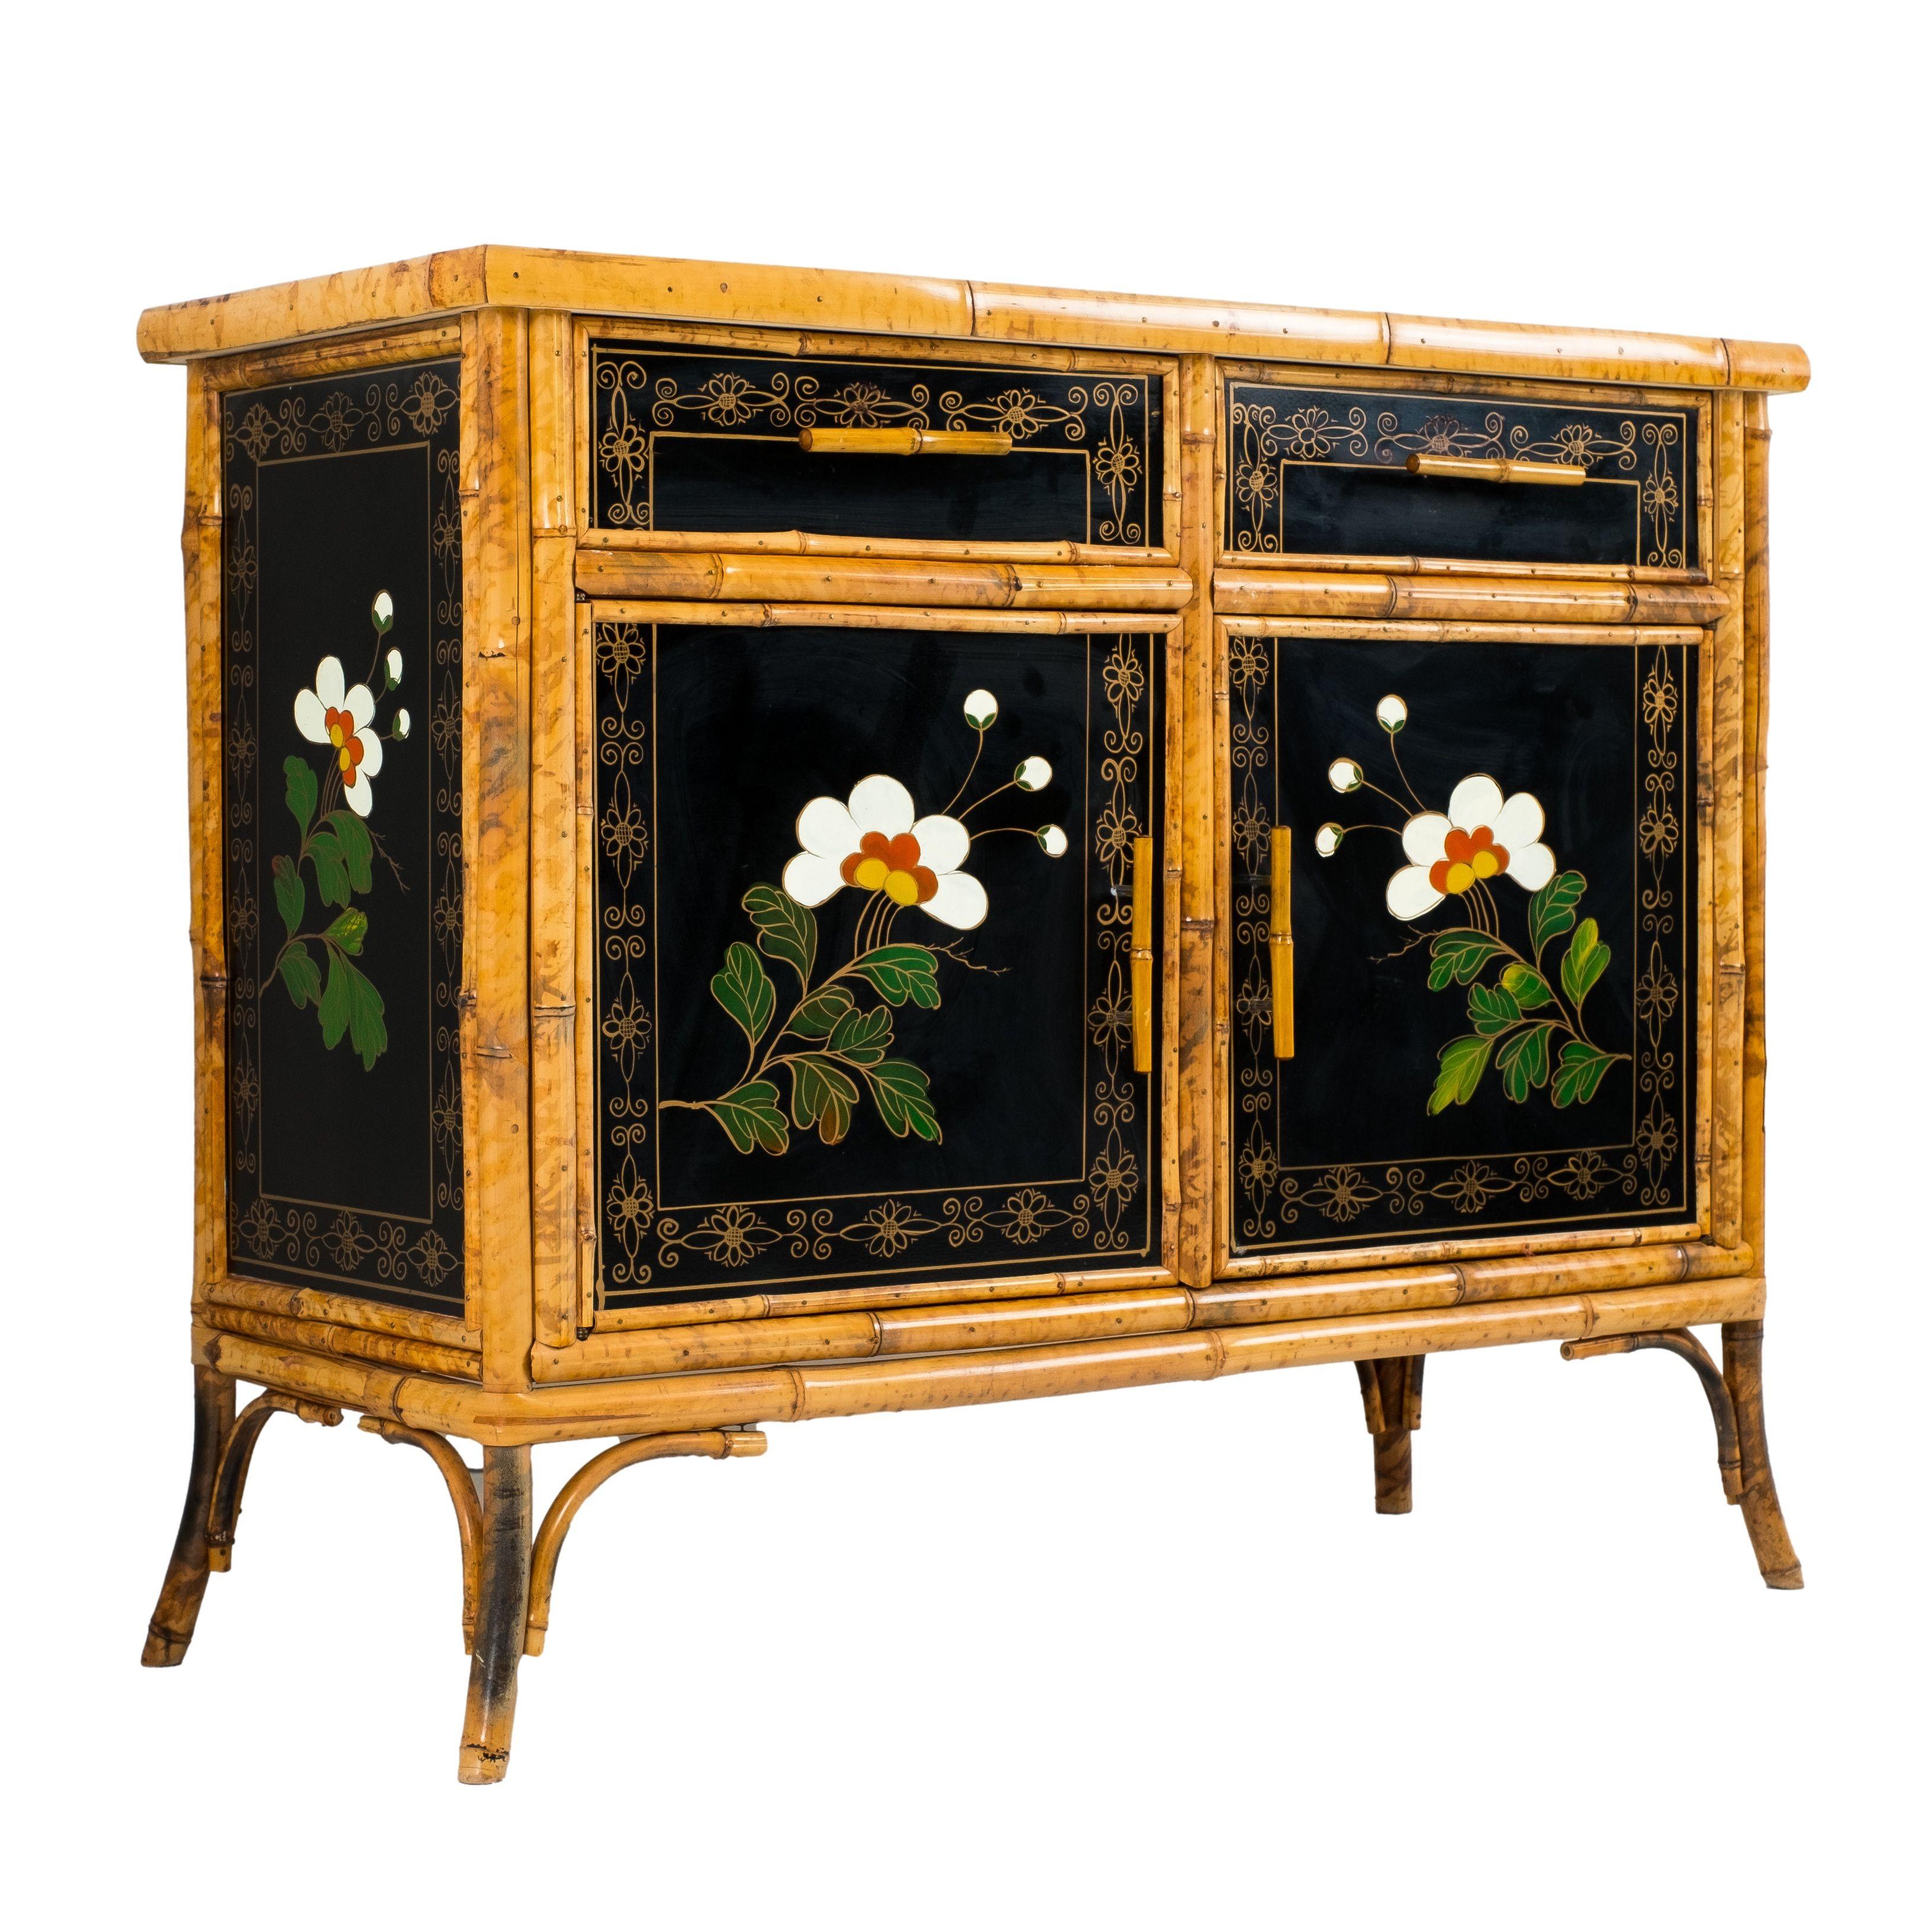 Enamel English Aesthetic Movement Bamboo Framed Leather Topped Cabinet